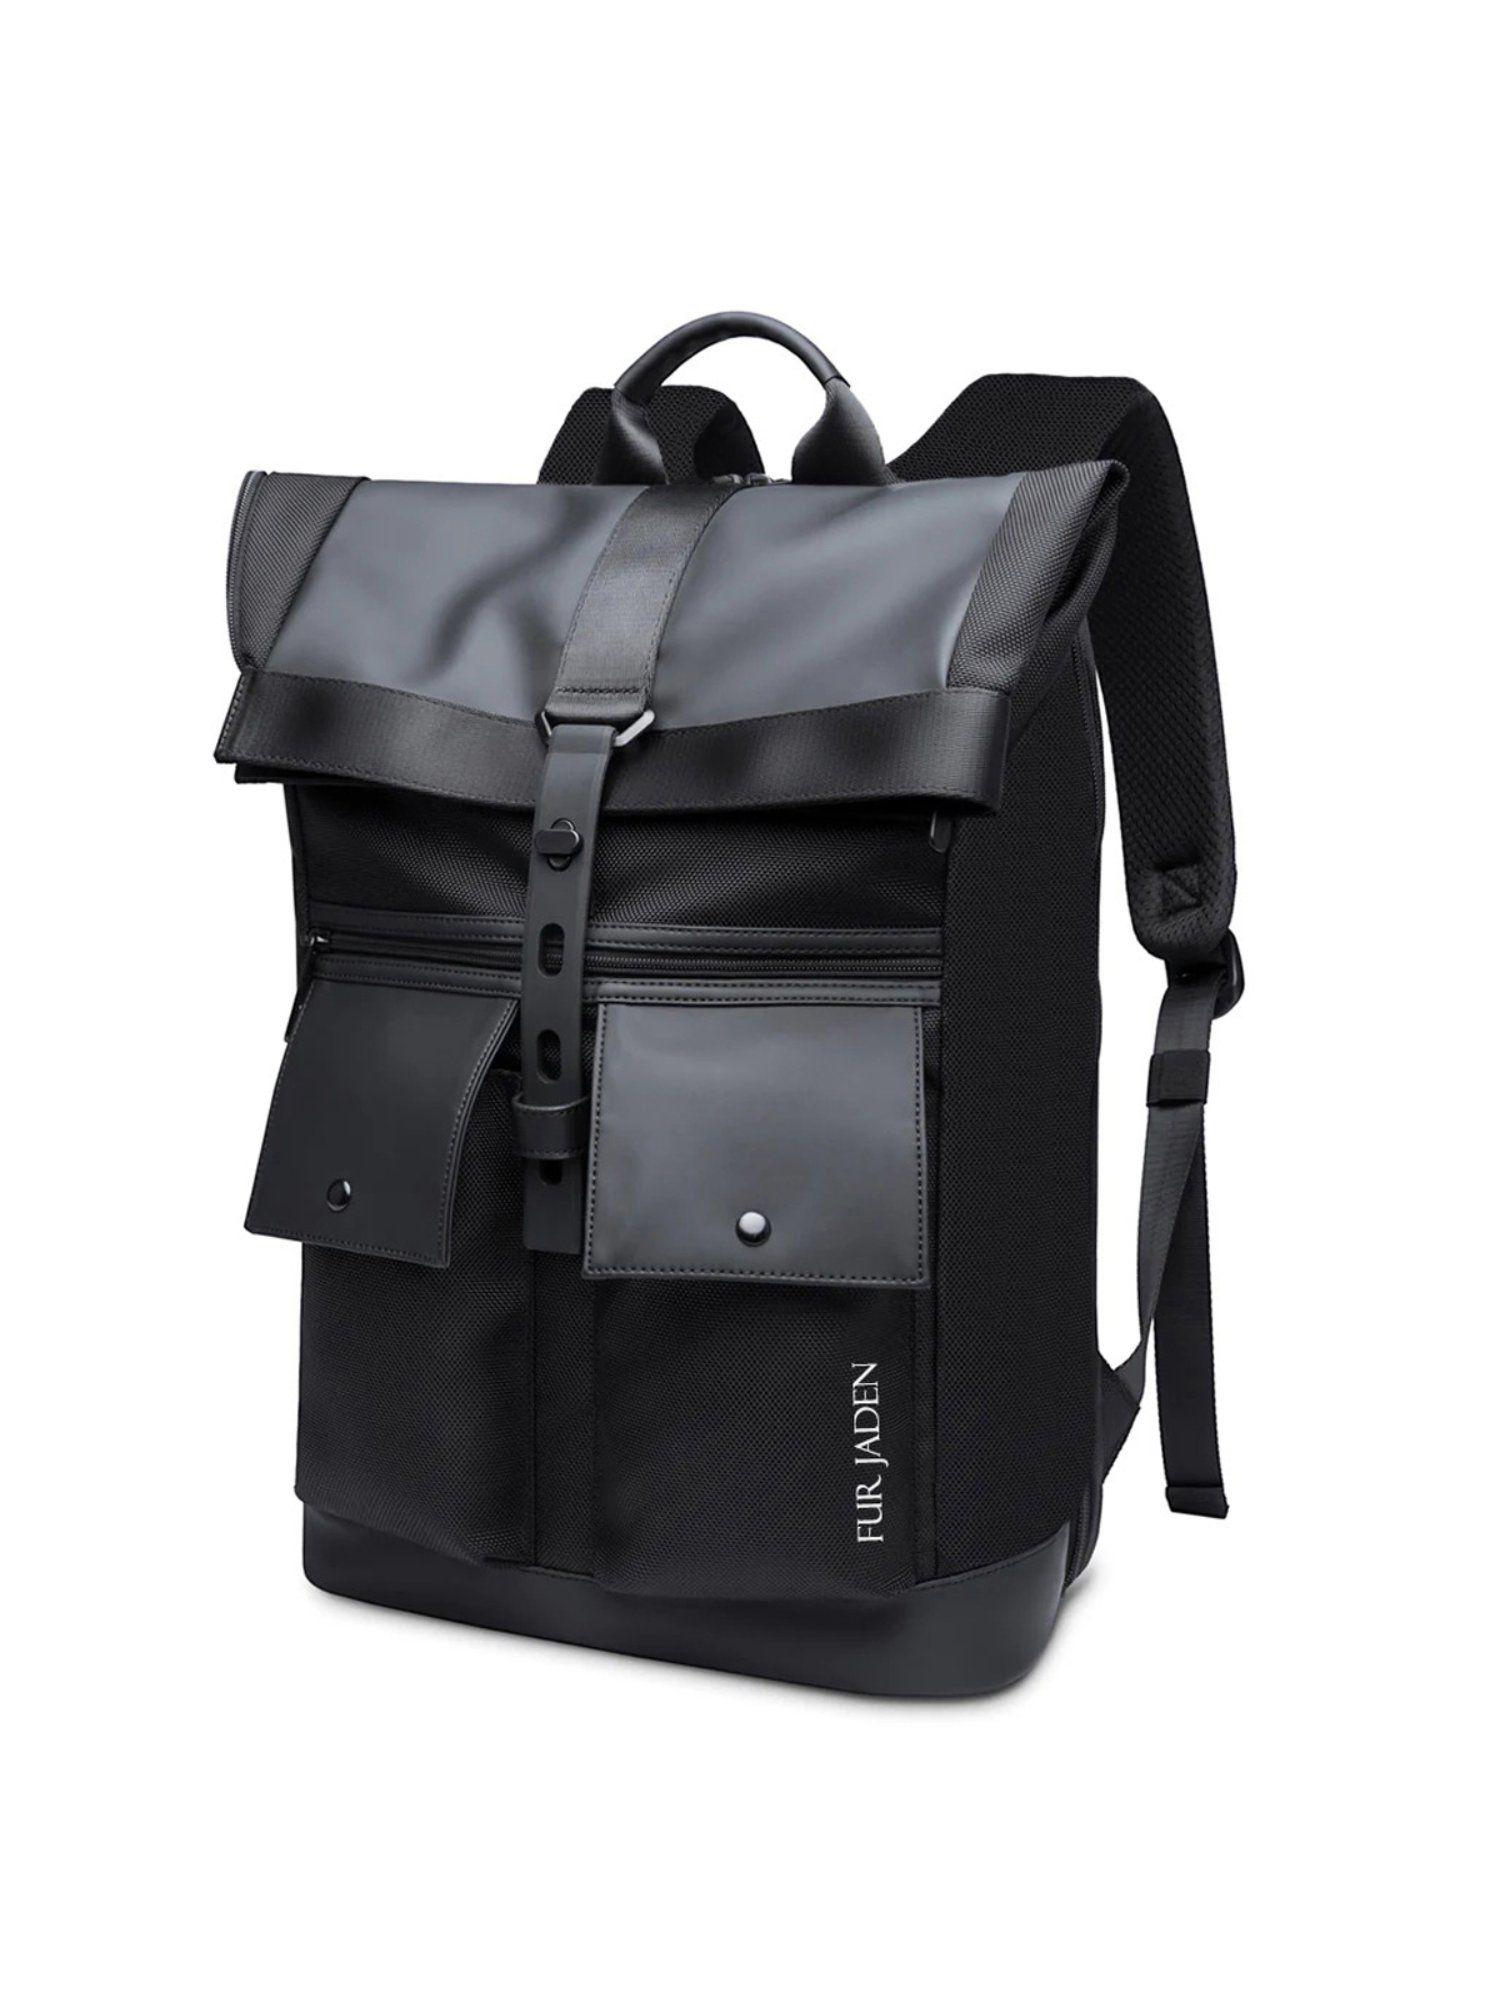 pro series innovative sack styled smart anti theft travel laptop backpack